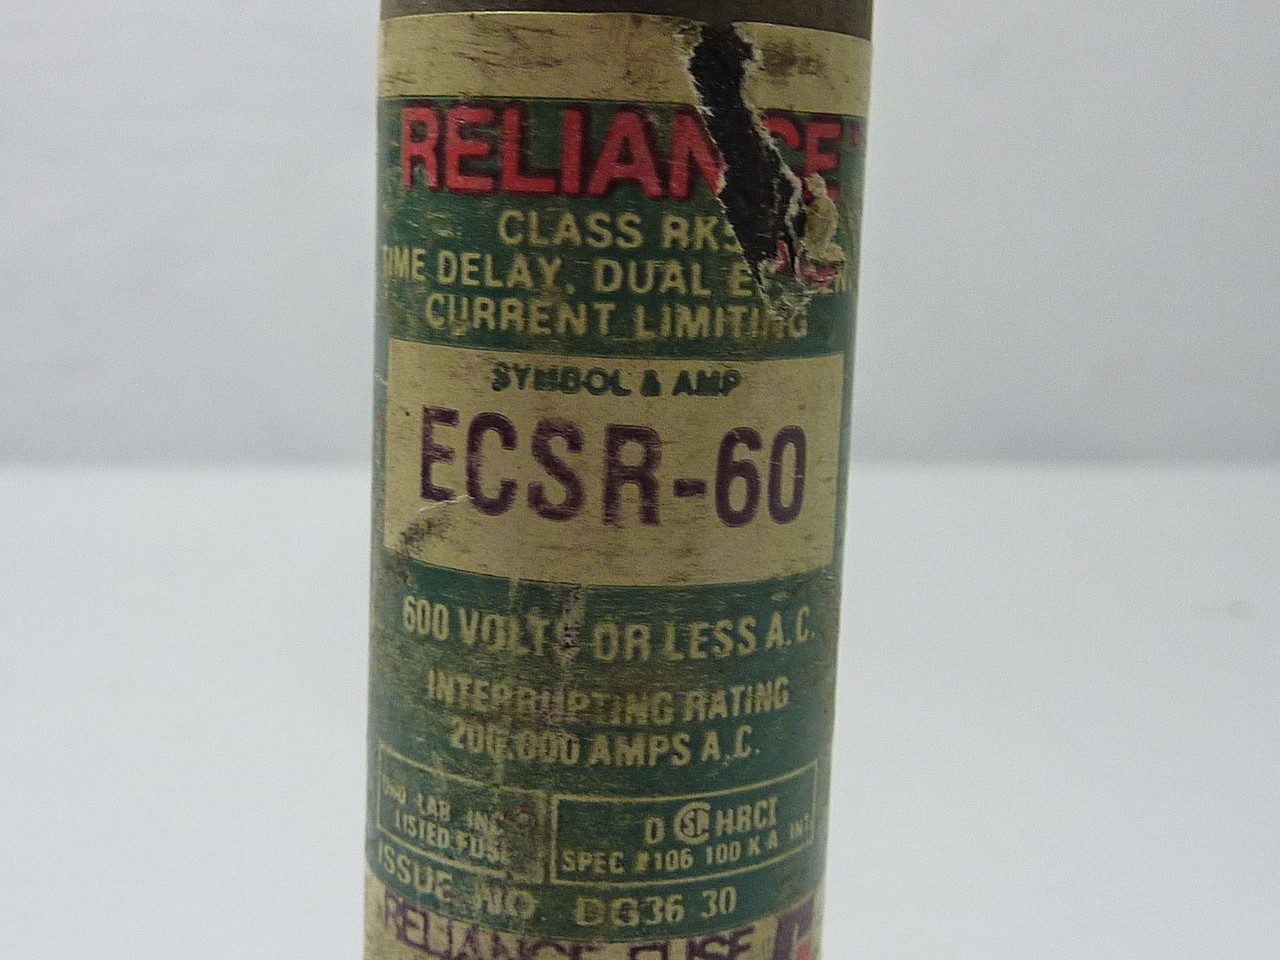 Reliance ECSR-60 Time Delay Dual Element Fuse 60A 600V USED